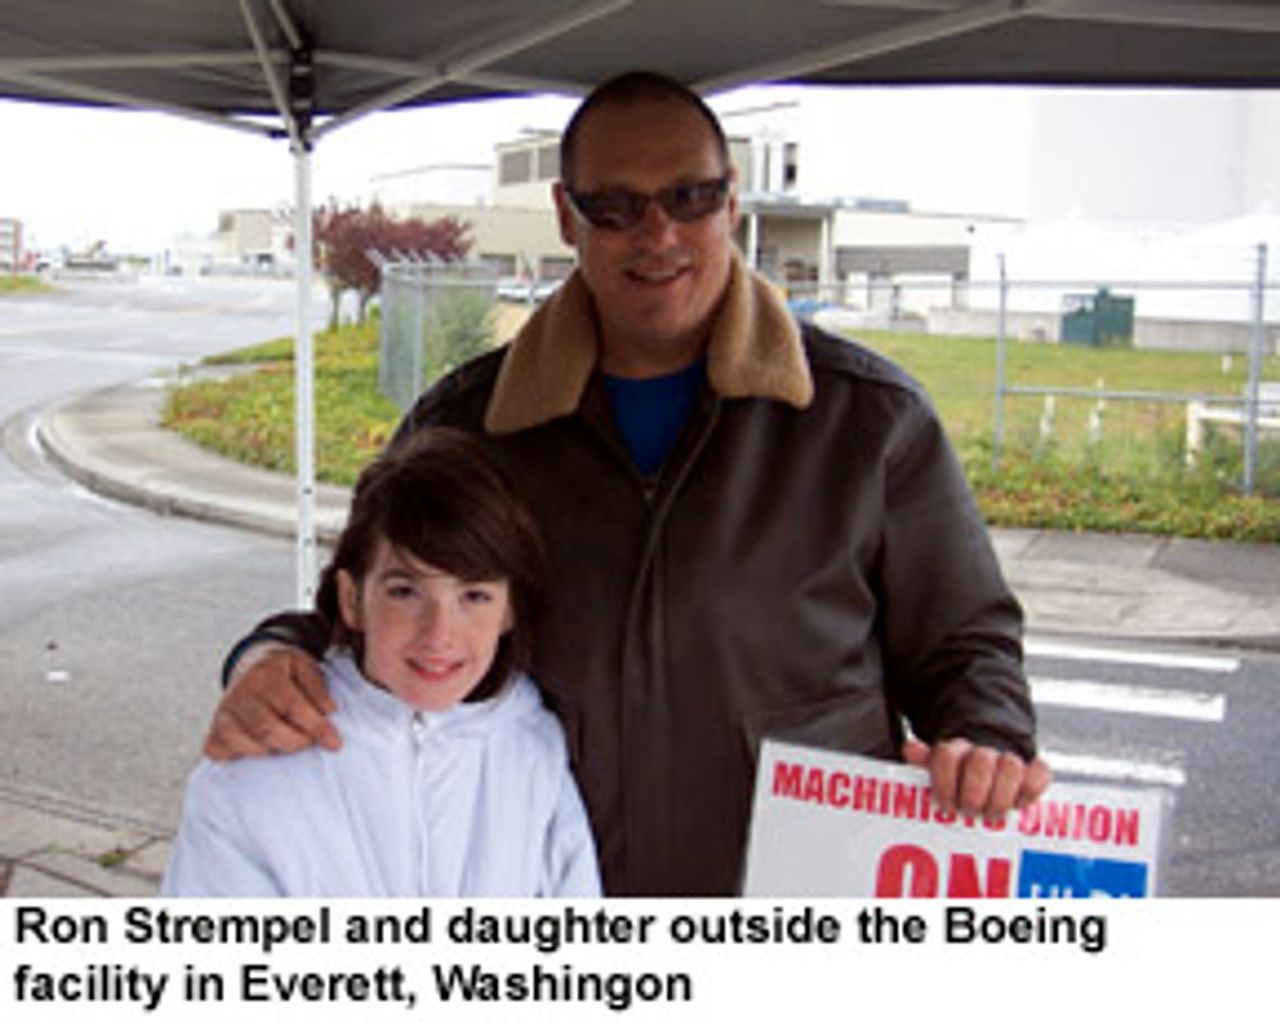 Ron Strempel and daughter outside the Boeing facility in Everett, Washington